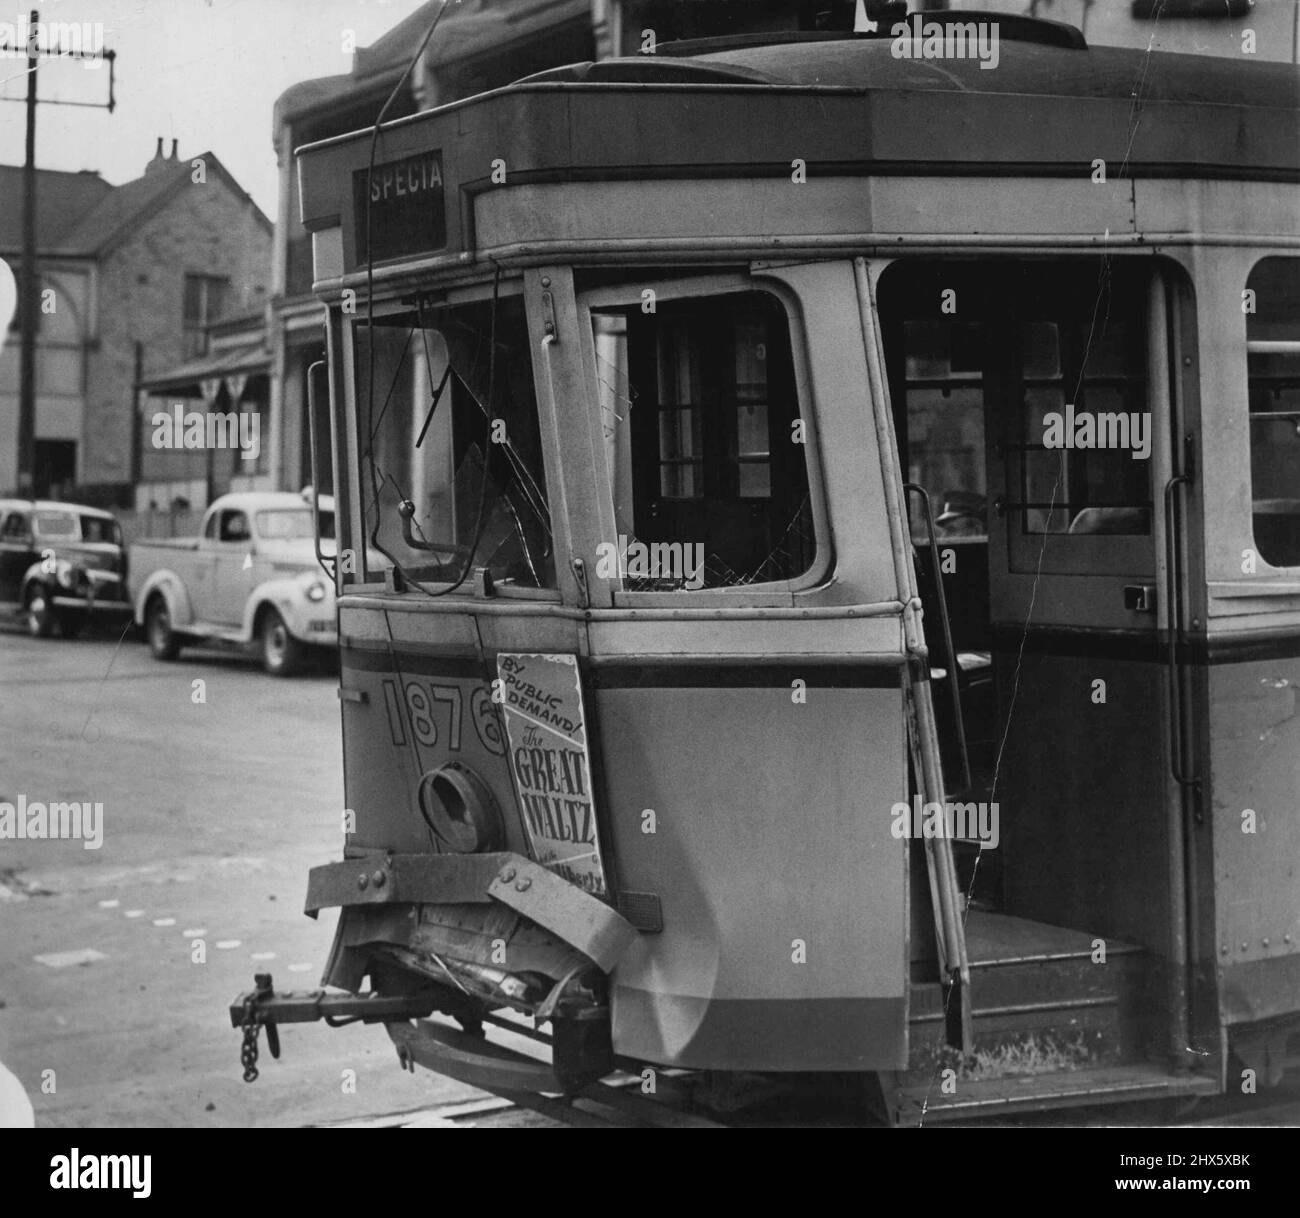 Runway Tram, The driver was showered with glass when this tram ran down steep Darling Street, Balmain, today, and crashed into a counterweight at the foot of. The tram ***** counterweight set ***** to prevent accidents, and no one was injured although the driver's cabin was showered with broken glass. May 5, 1949. Stock Photo